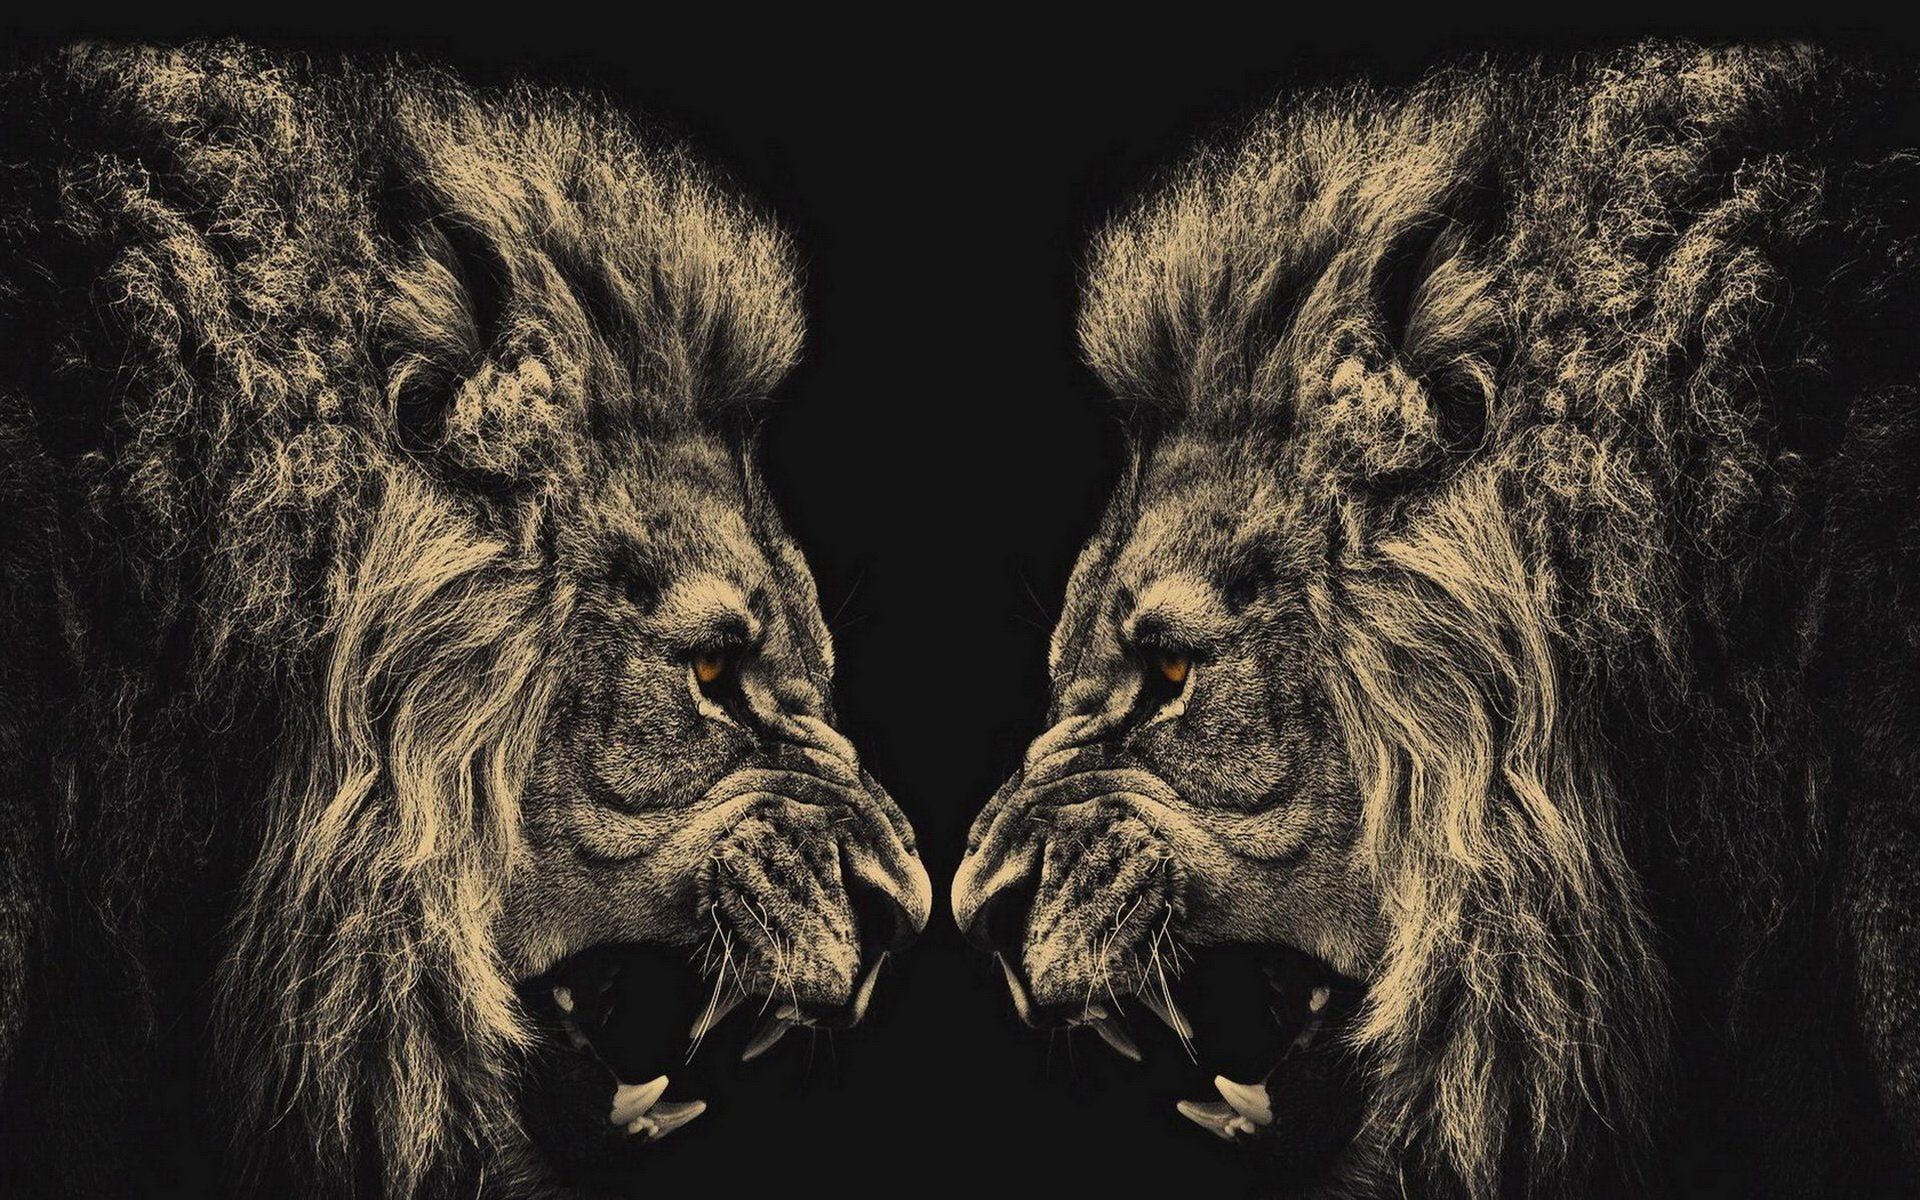 Angry Lion Wallpaper HD Resolution. Lion wallpaper, Lion HD wallpaper, Lion wallpaper iphone